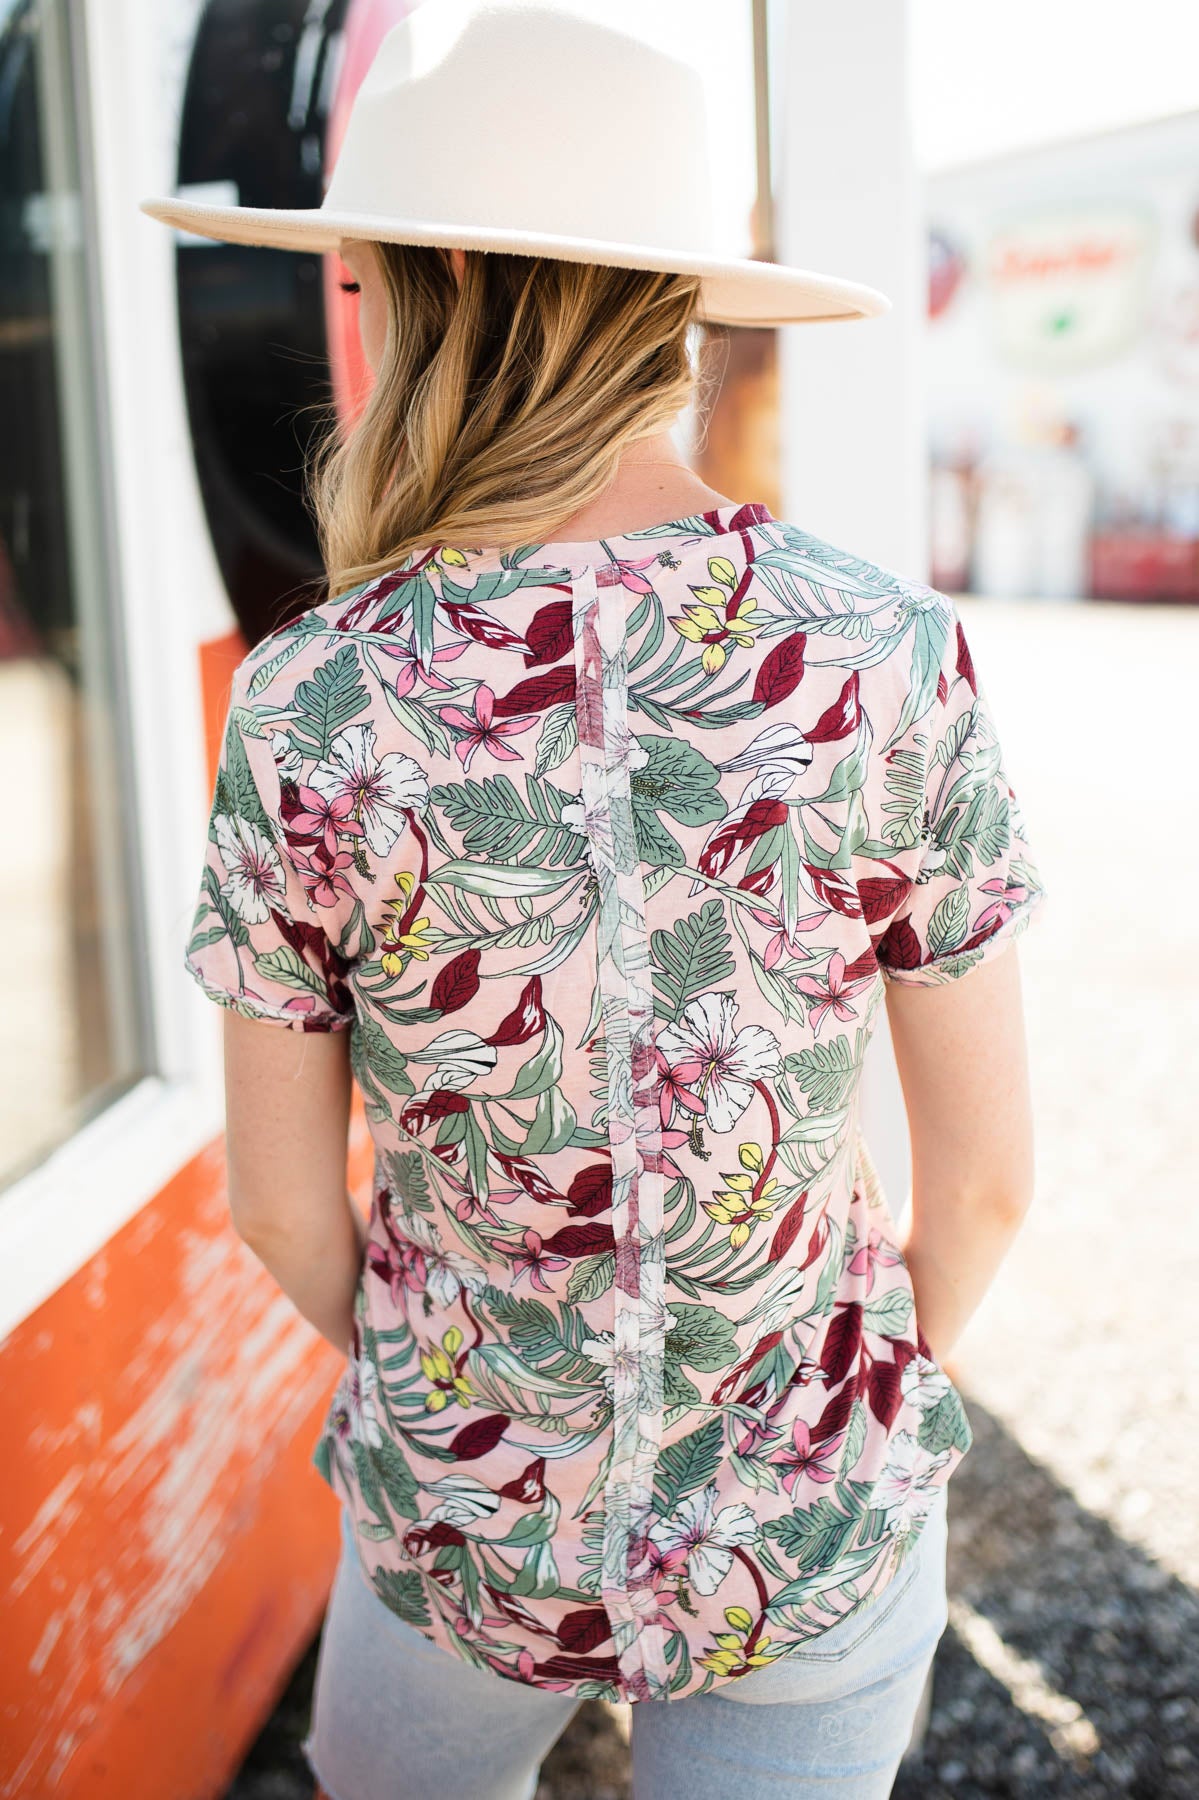 Back view of a short sleeve pink floral top that buttons up and has a v-neck.